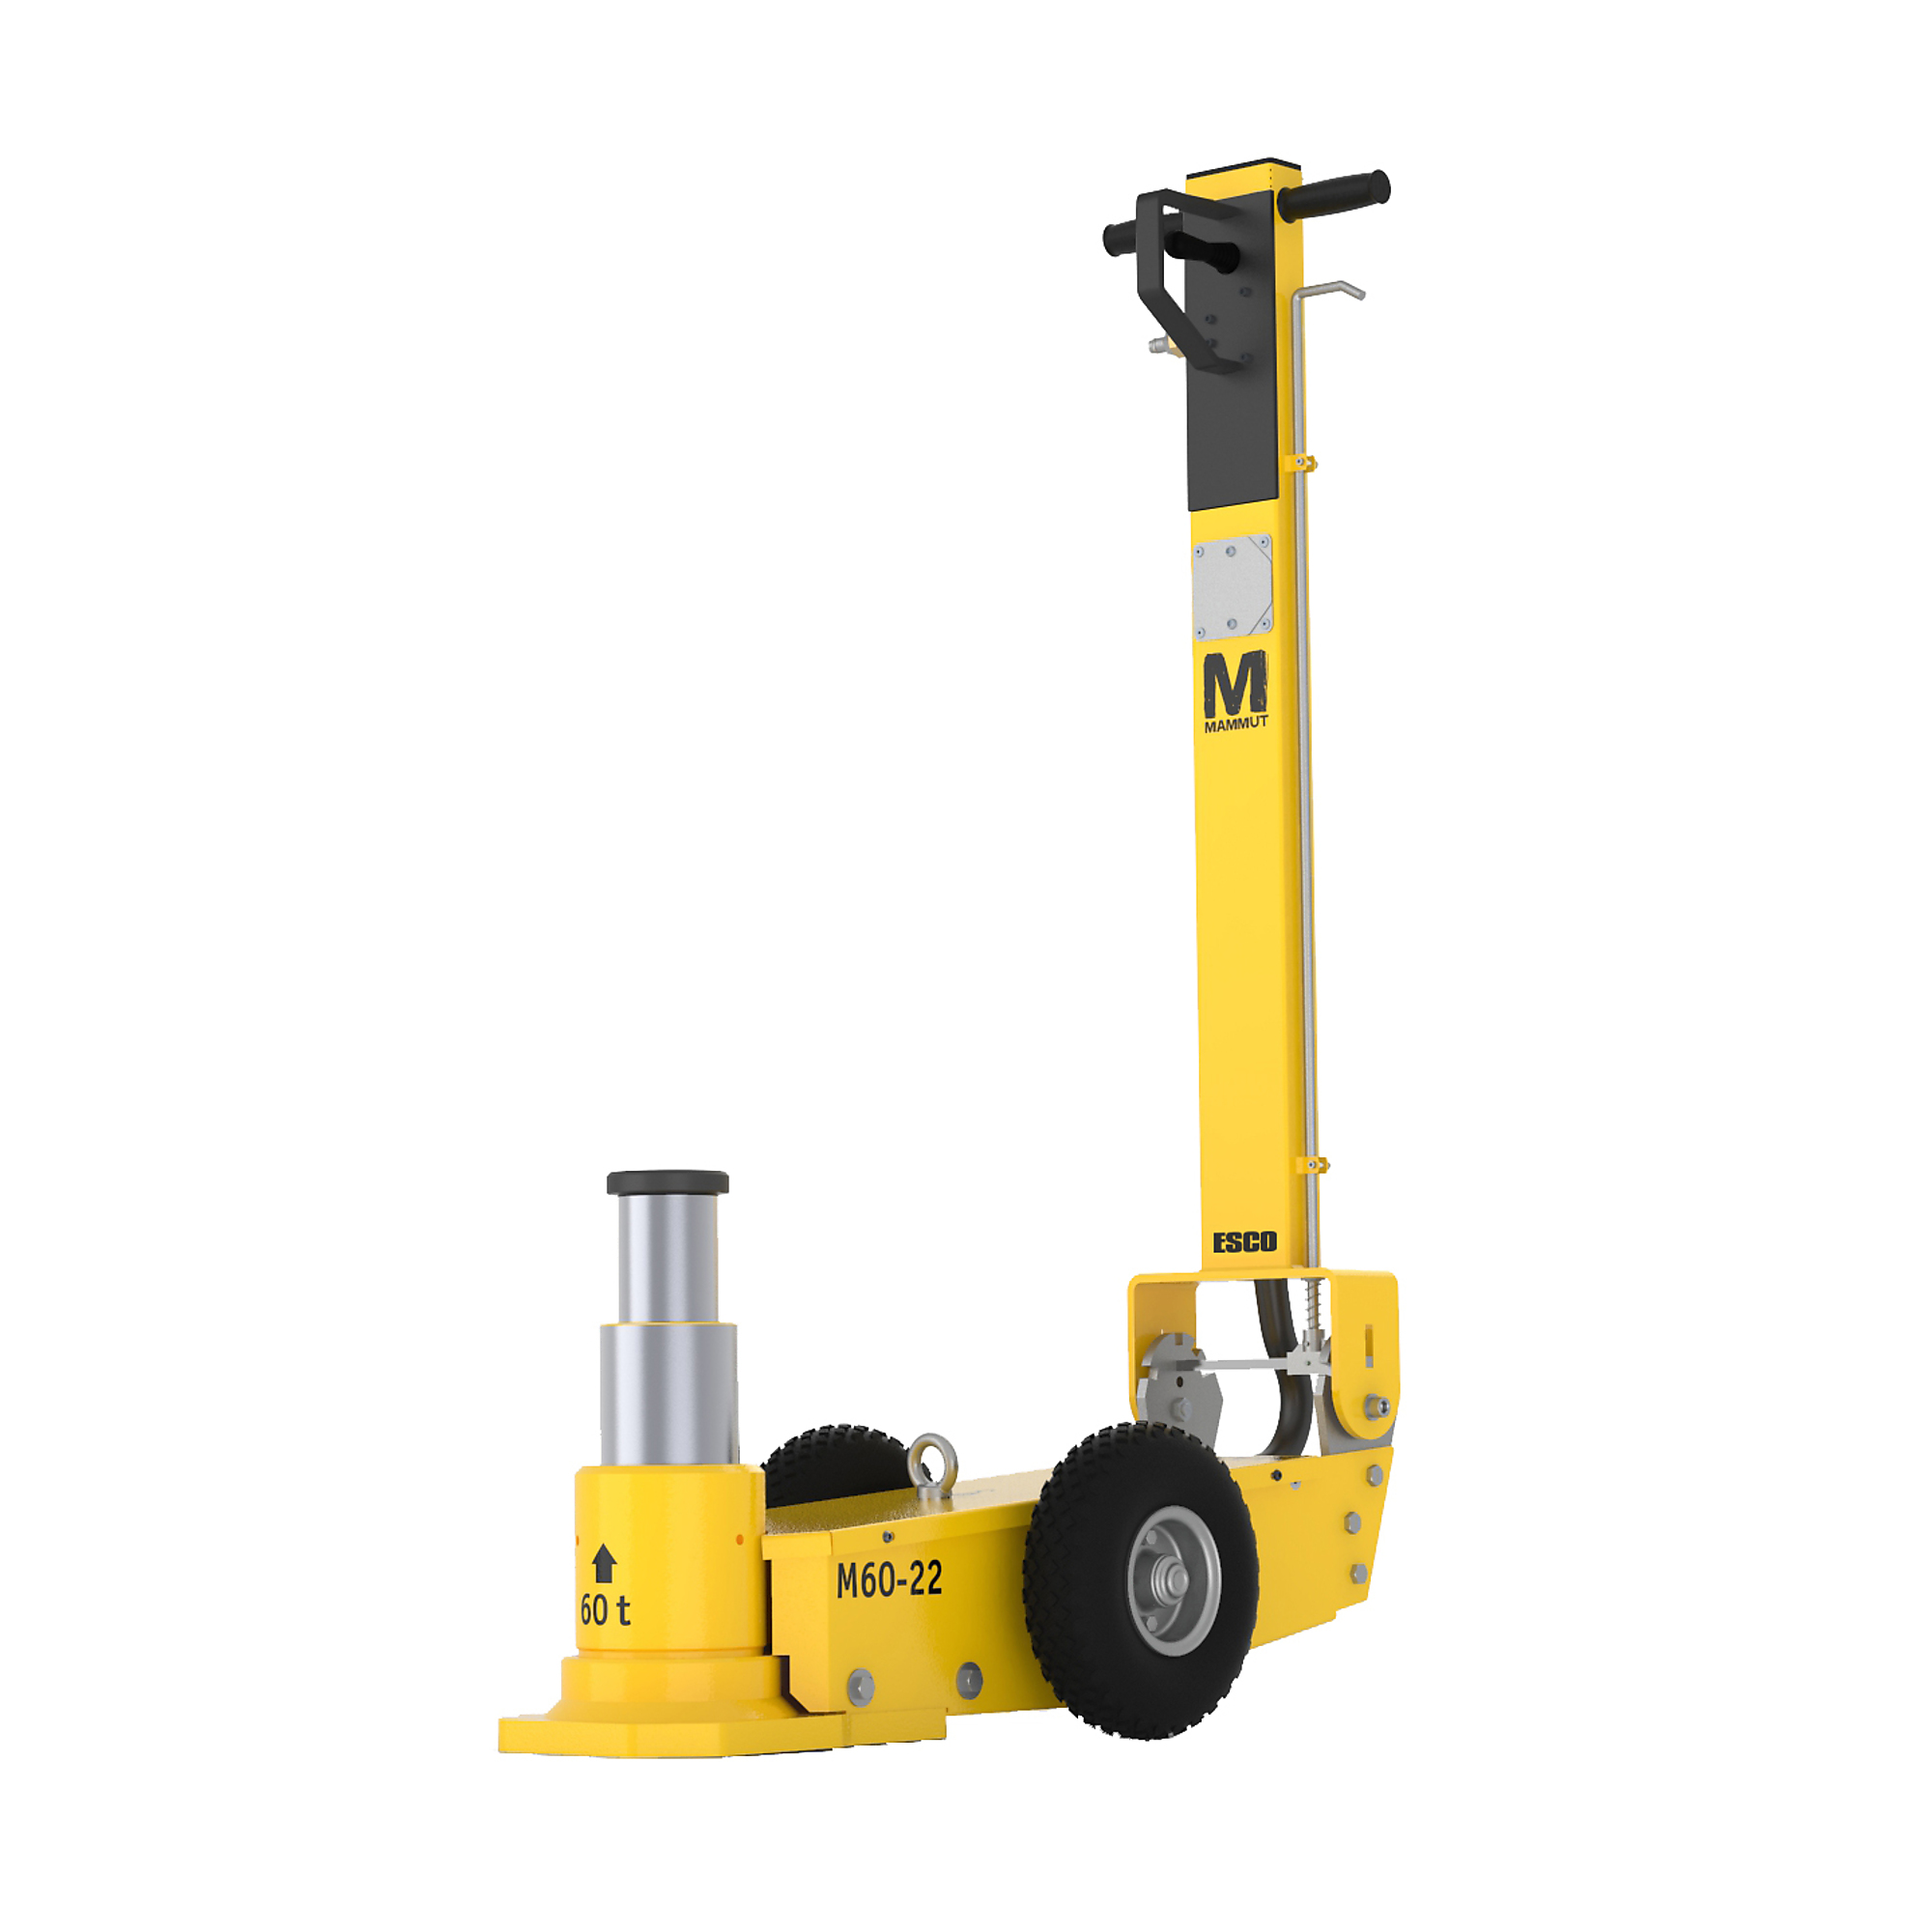 ESCO Mammut, Mammut 2 stage jack, Lift Capacity 66 Tons, Max. Lift Height 17.6 in, Power Source Air/Hydraulic, Model 91001